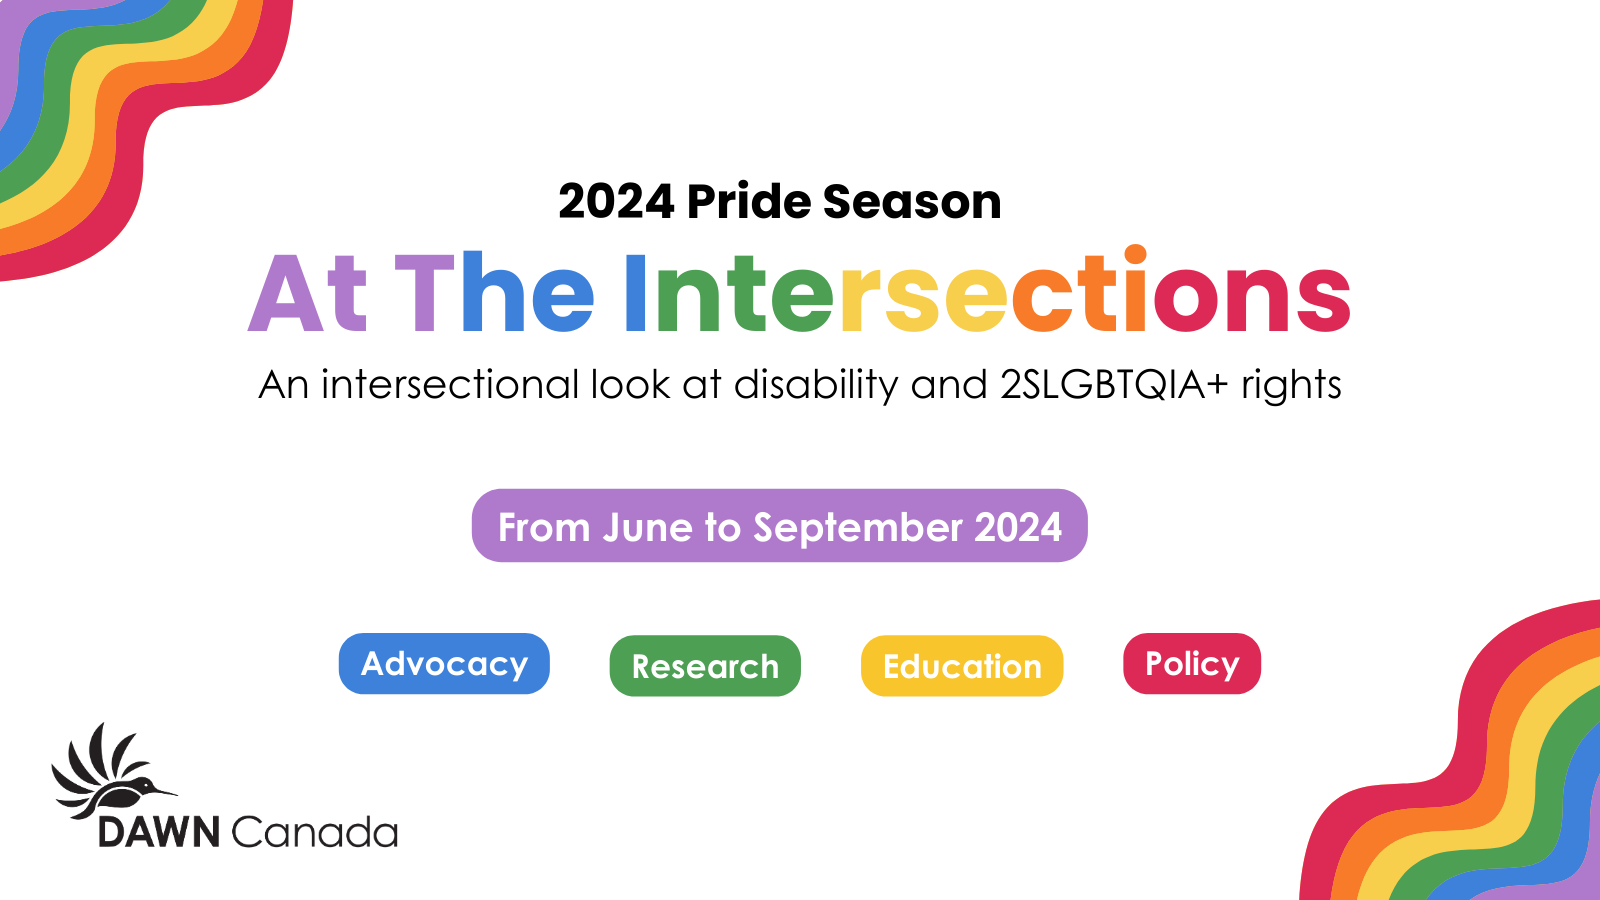 Poster for DAWN's campaign, 2024 Pride Season At The Intersections, from June to September 2024, which will cover DAWN's four pillars: Advocacy, Research, Education and Policy.